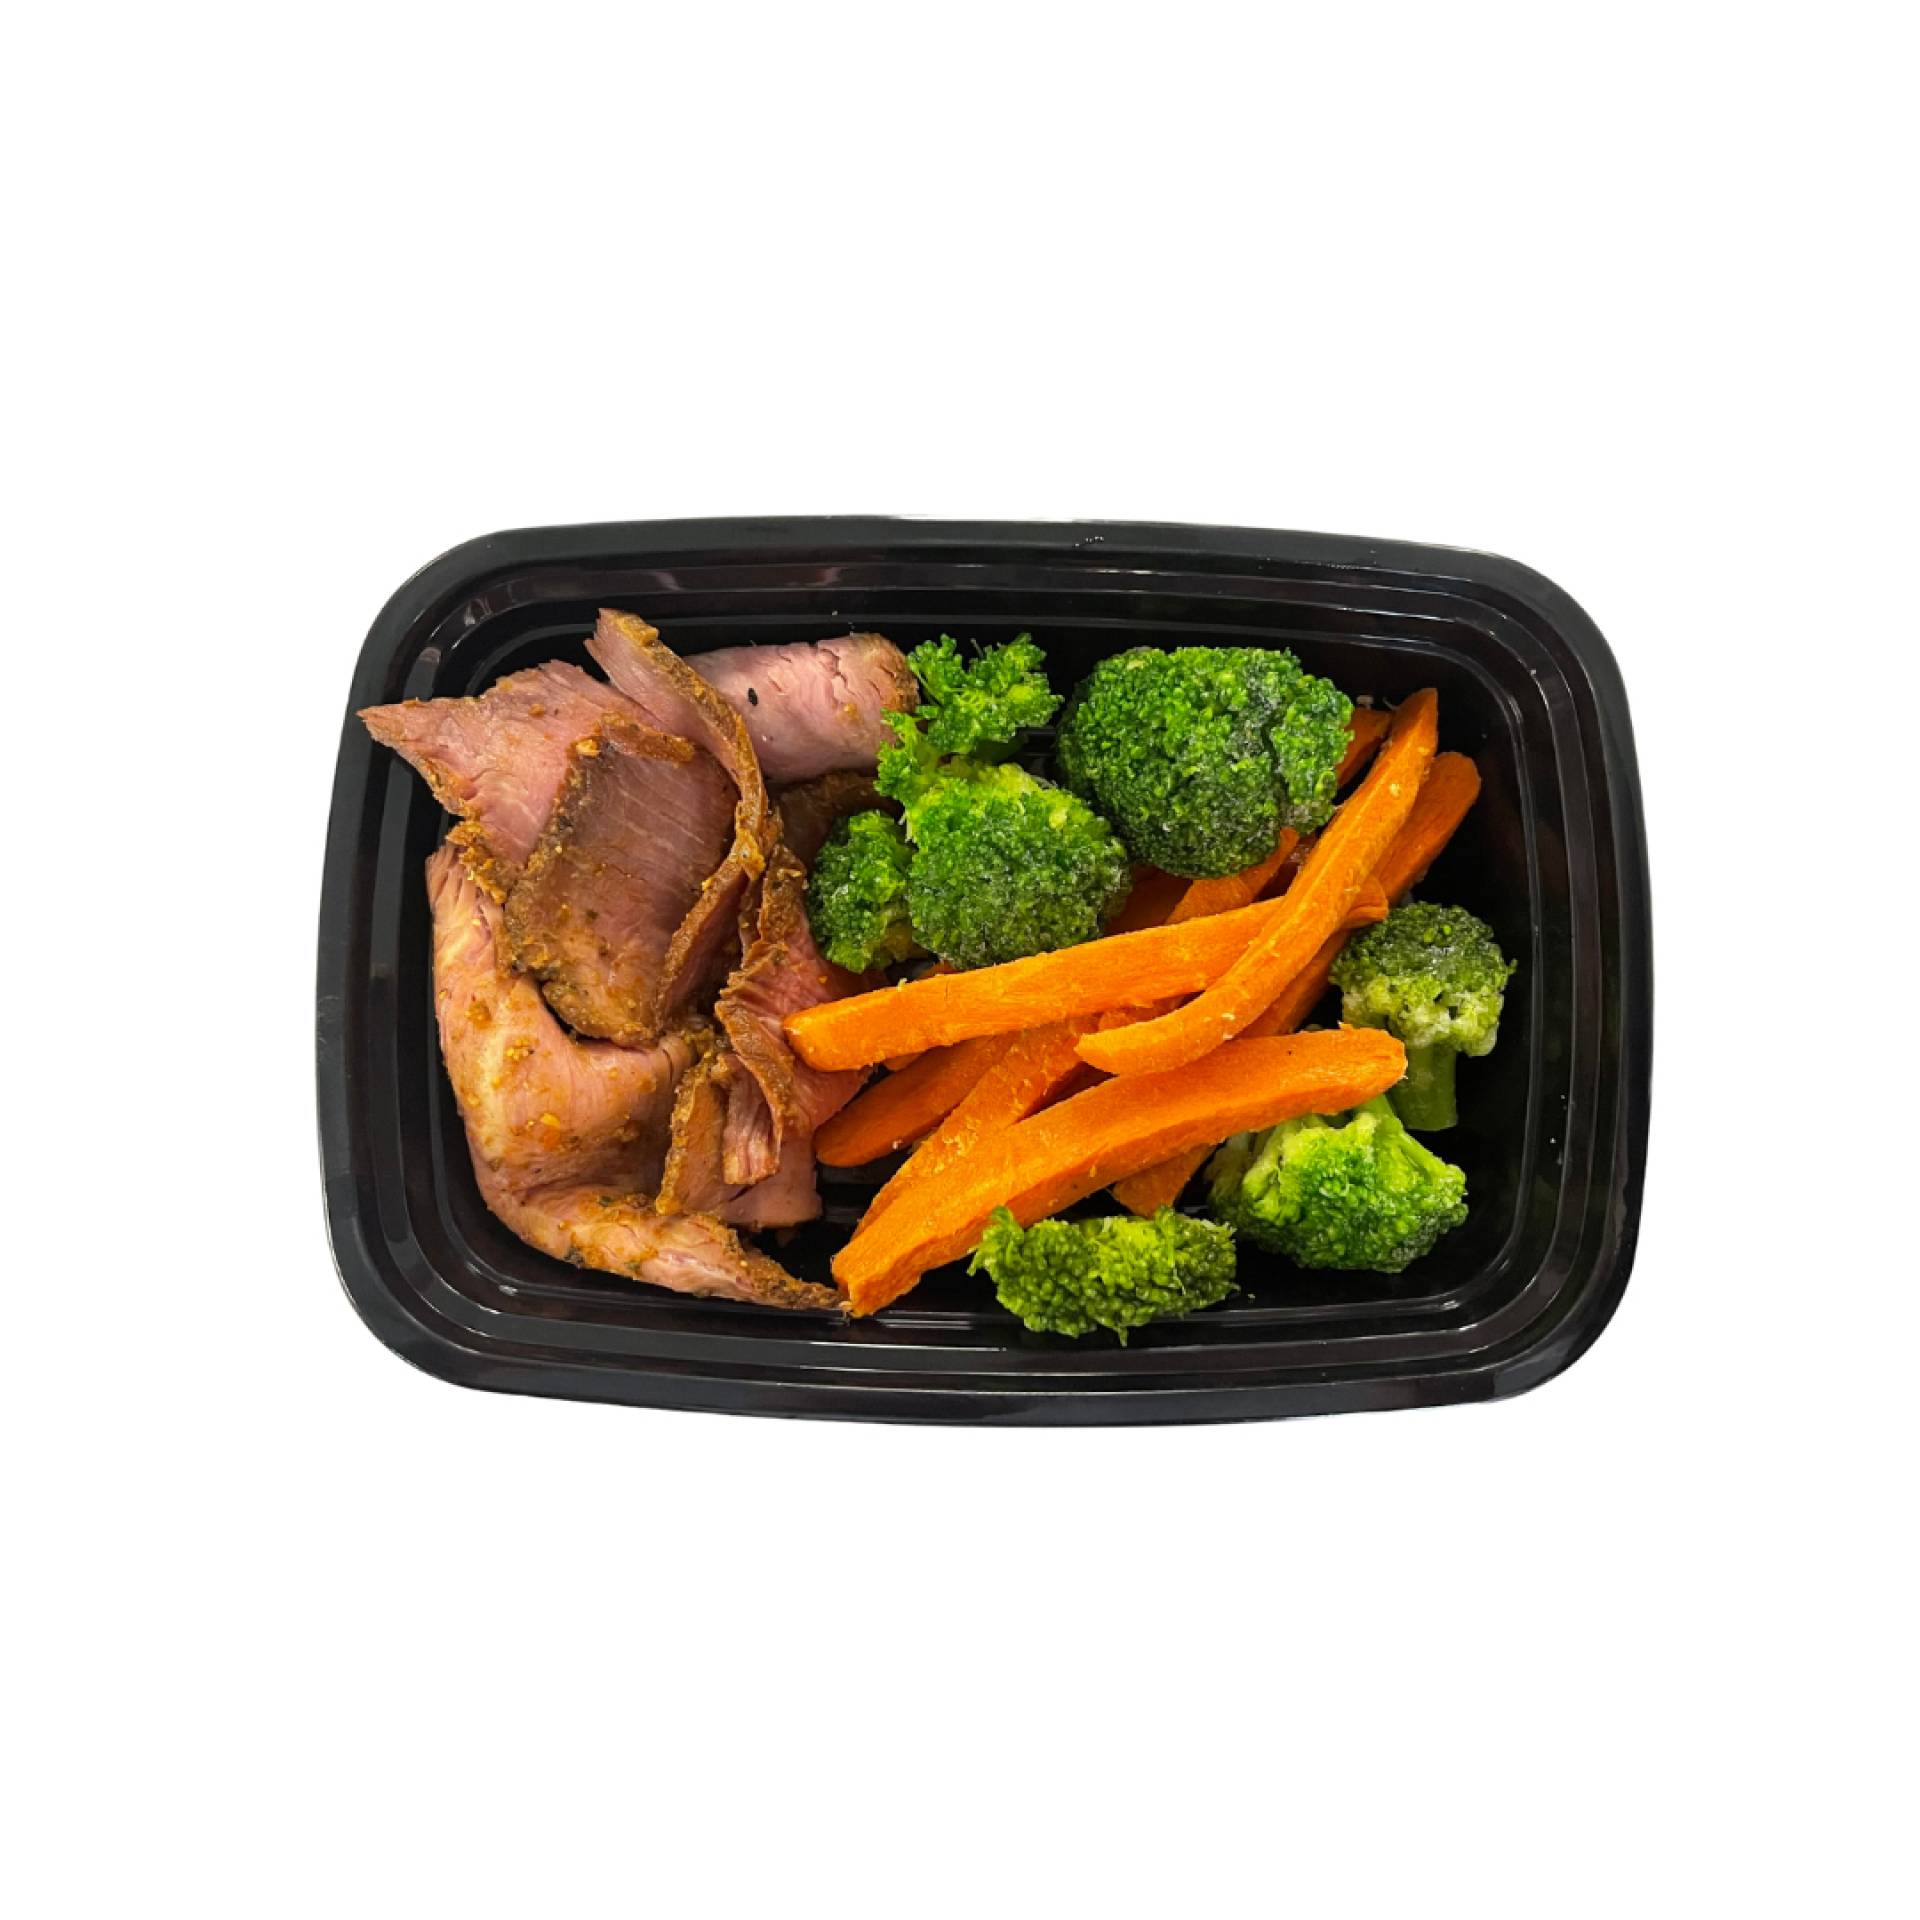 Smoked Tri-Tip with Broccoli & Carrots